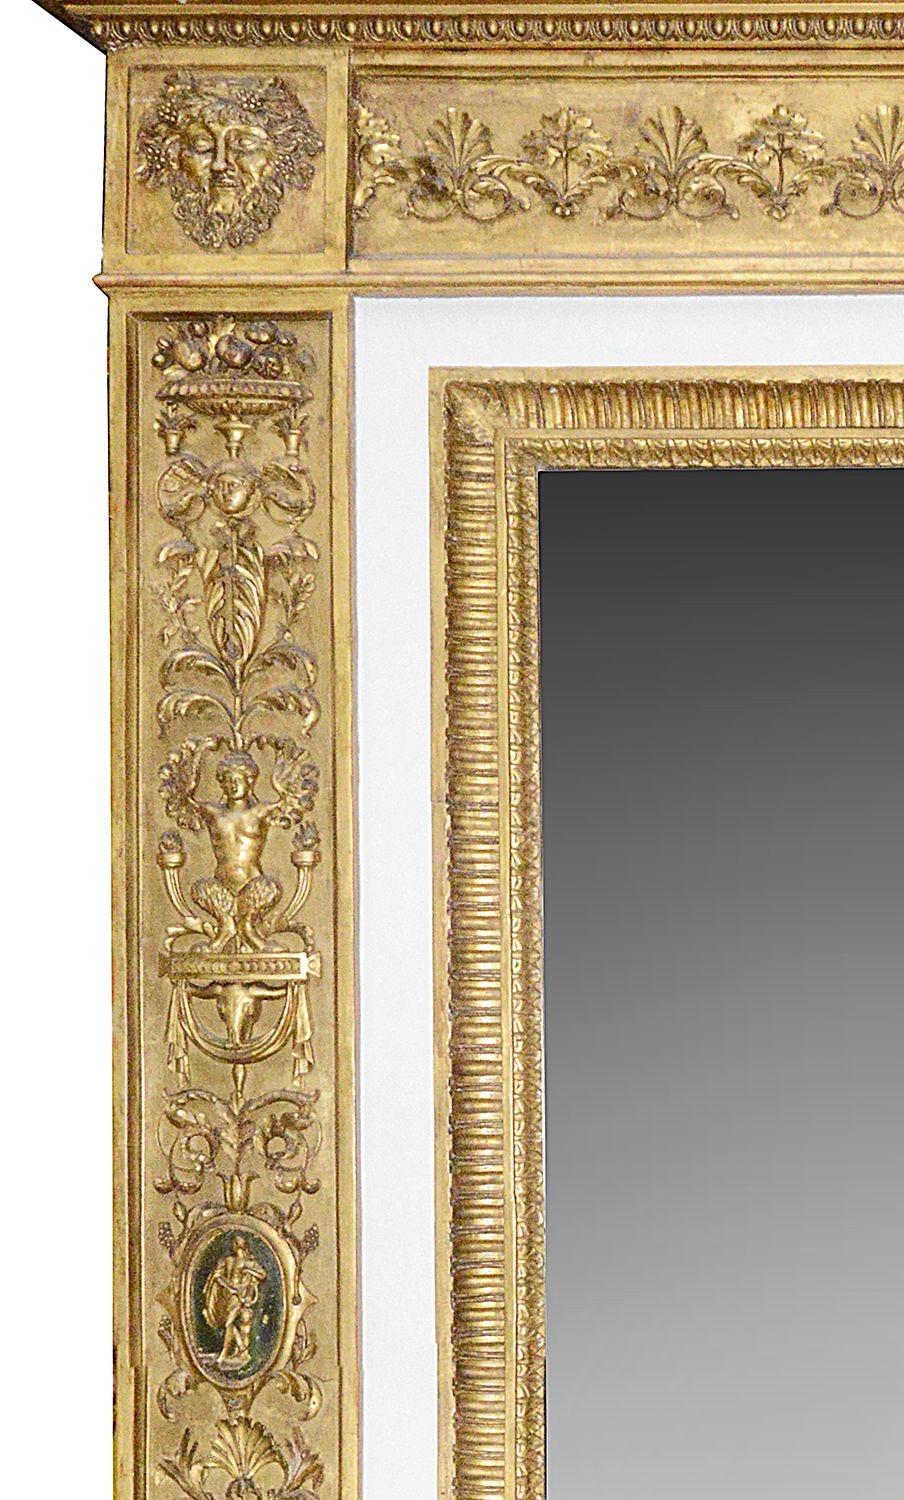 A very impressive late 18th Century Italian carved gilt-wood and gesso Pier glass wall mirror. Having wonderful Bacchus masks to either side, scrolling foliate, ribbon decoration with classical figures, busts and urns to the surround.
 
Batch 74.  